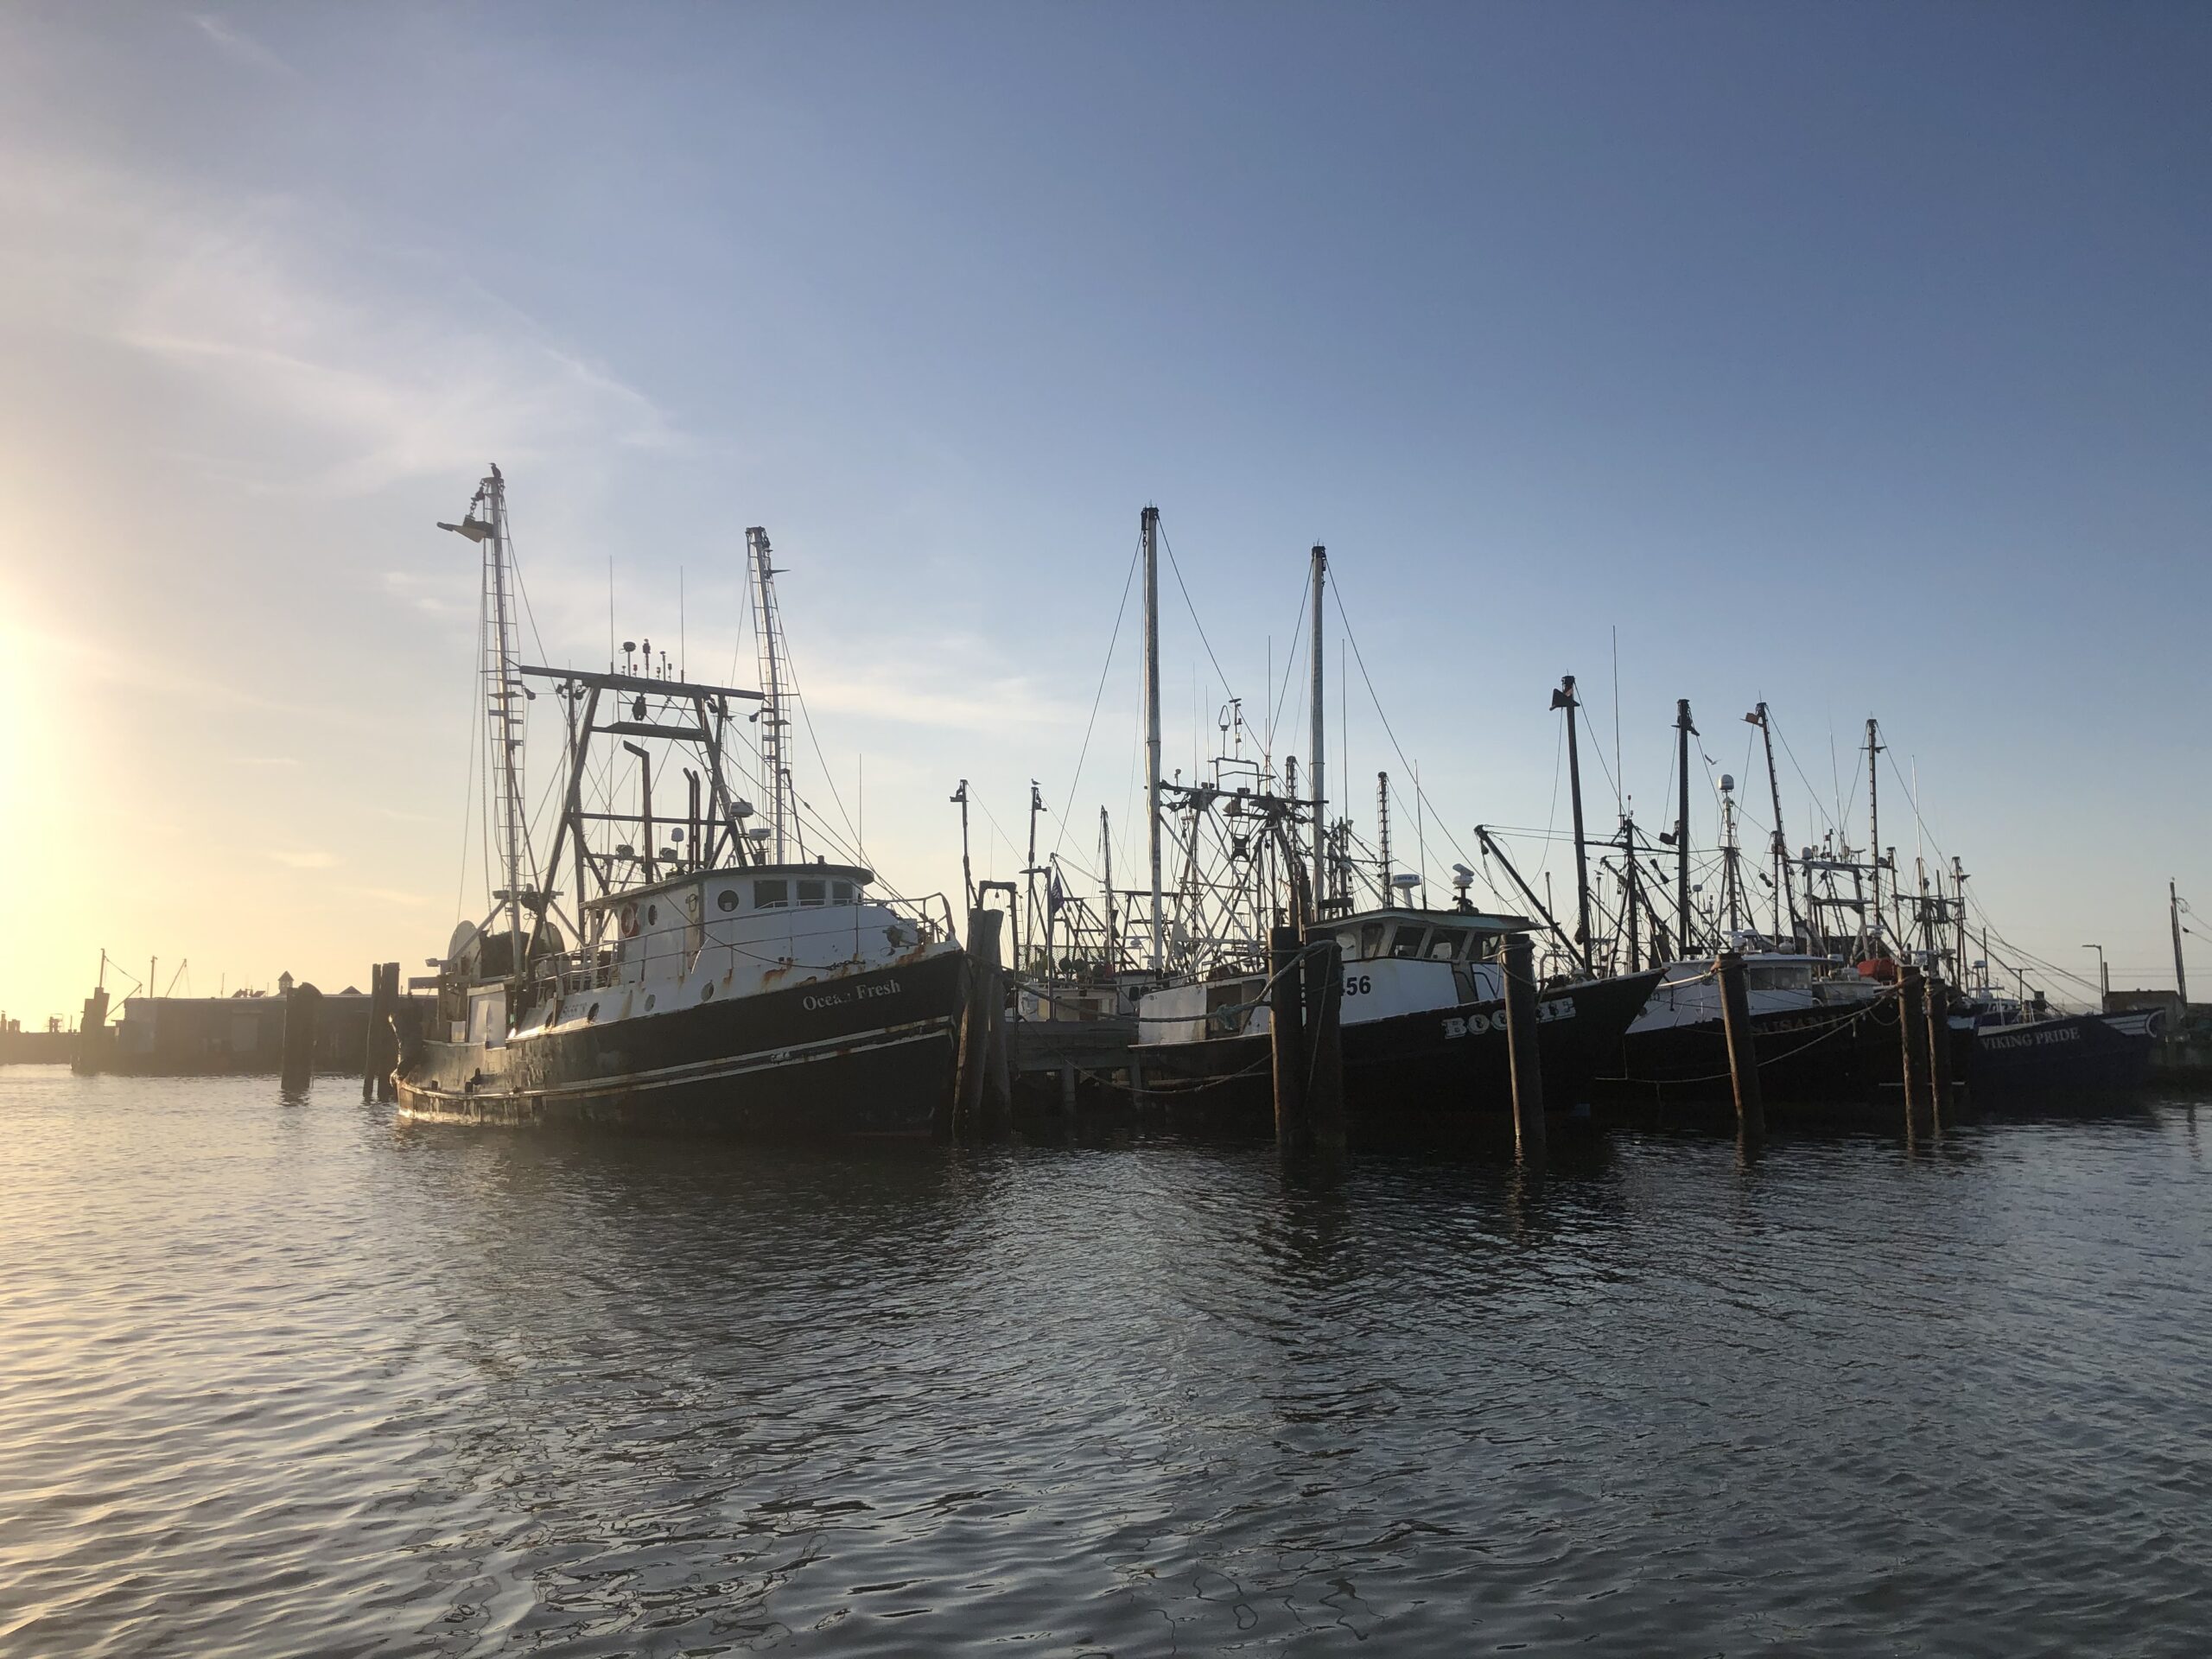 Many boats from the Shinnecock Inlet commercial fishing fleet harvest squid, tilefish and other marine species from the waters above the Hudson Canyon. Fishermen worry that designating the canyon a national marine sanctuary could lead to banning commercial fishing there, though the nomination has not proposed doing so.